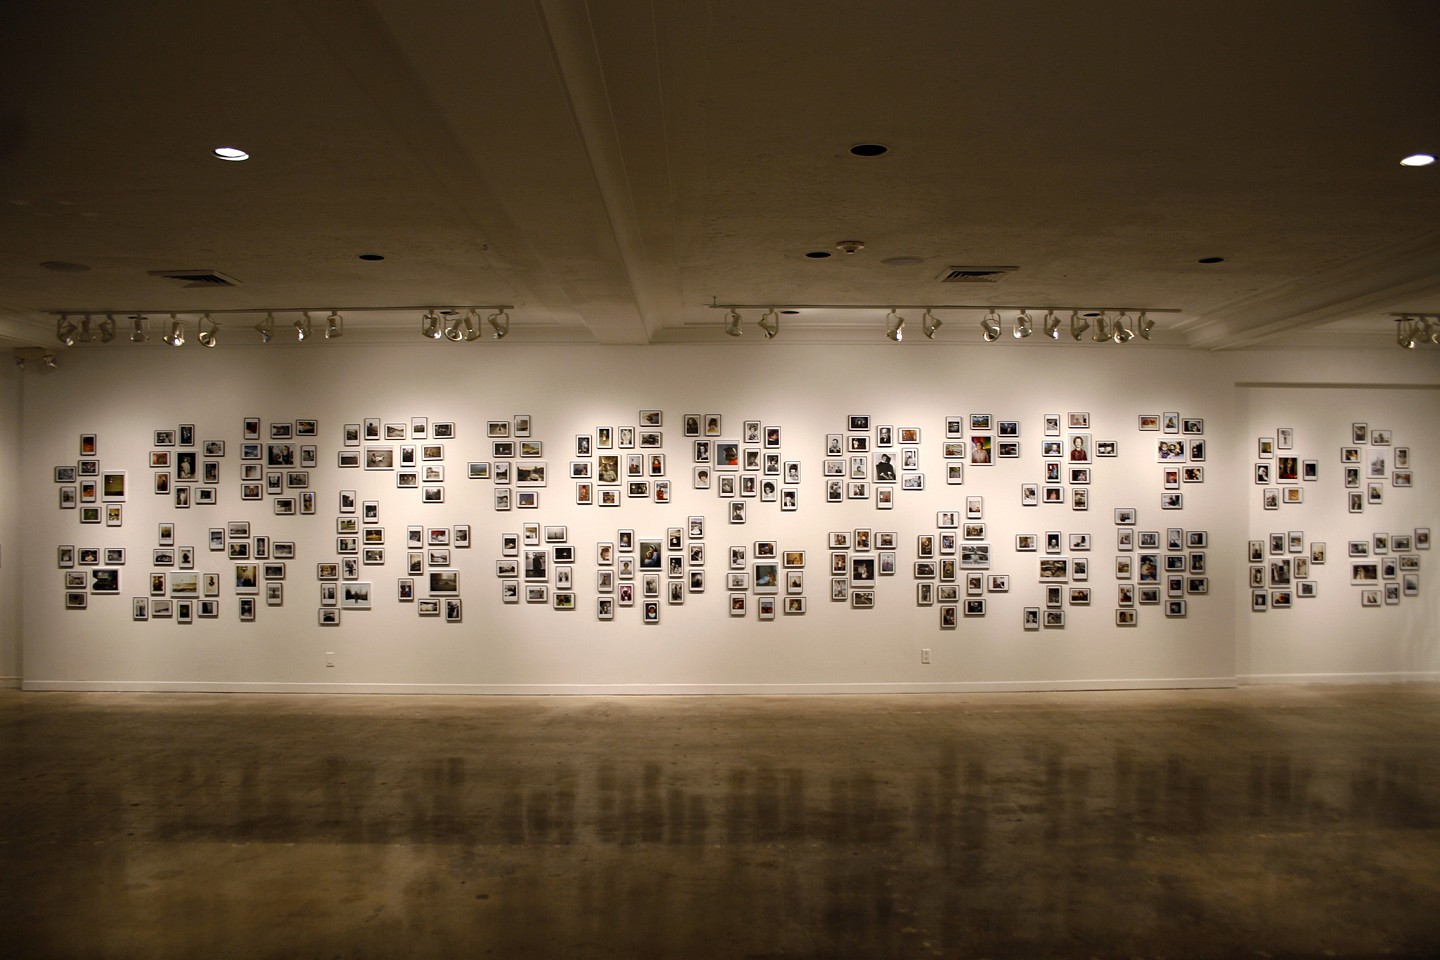 Oliver Wasow, Art and Culture Center of Hollywood, Florida (installation view)
Found photographs